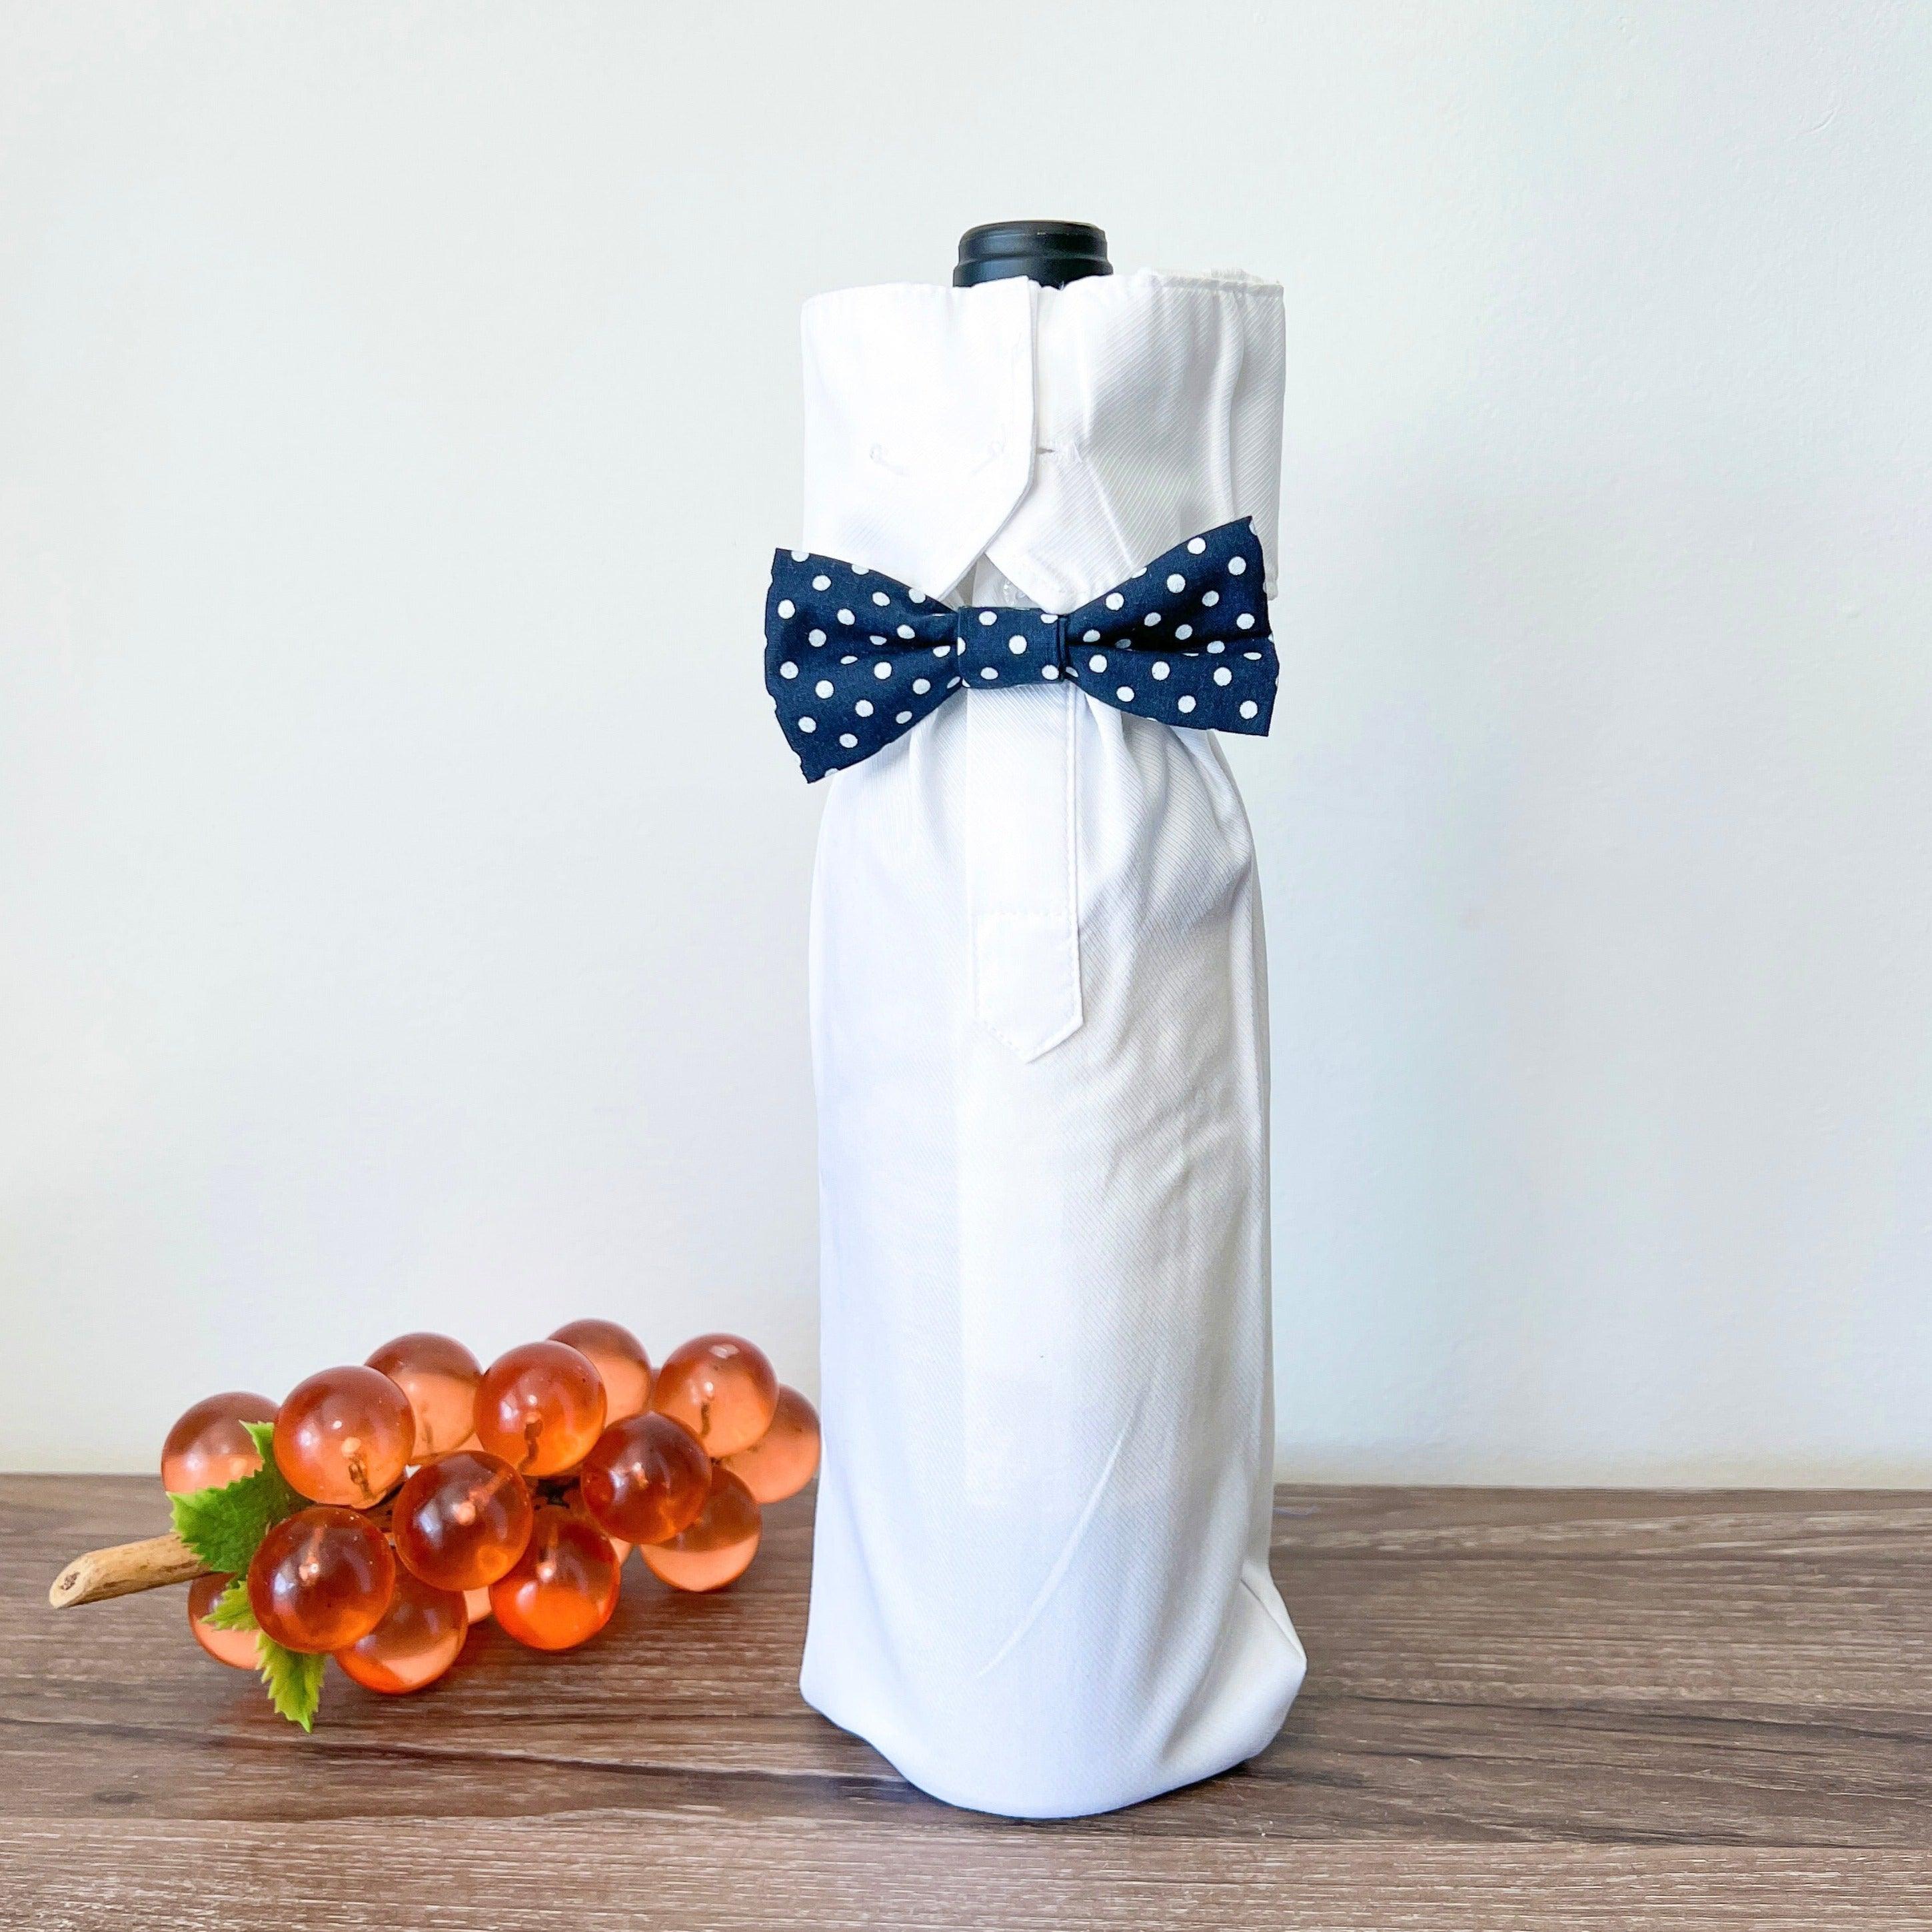 Reusable Wine Bags, Crafted from Dress Shirts for Eco-Friendly Sustainable Design. Set of 2.